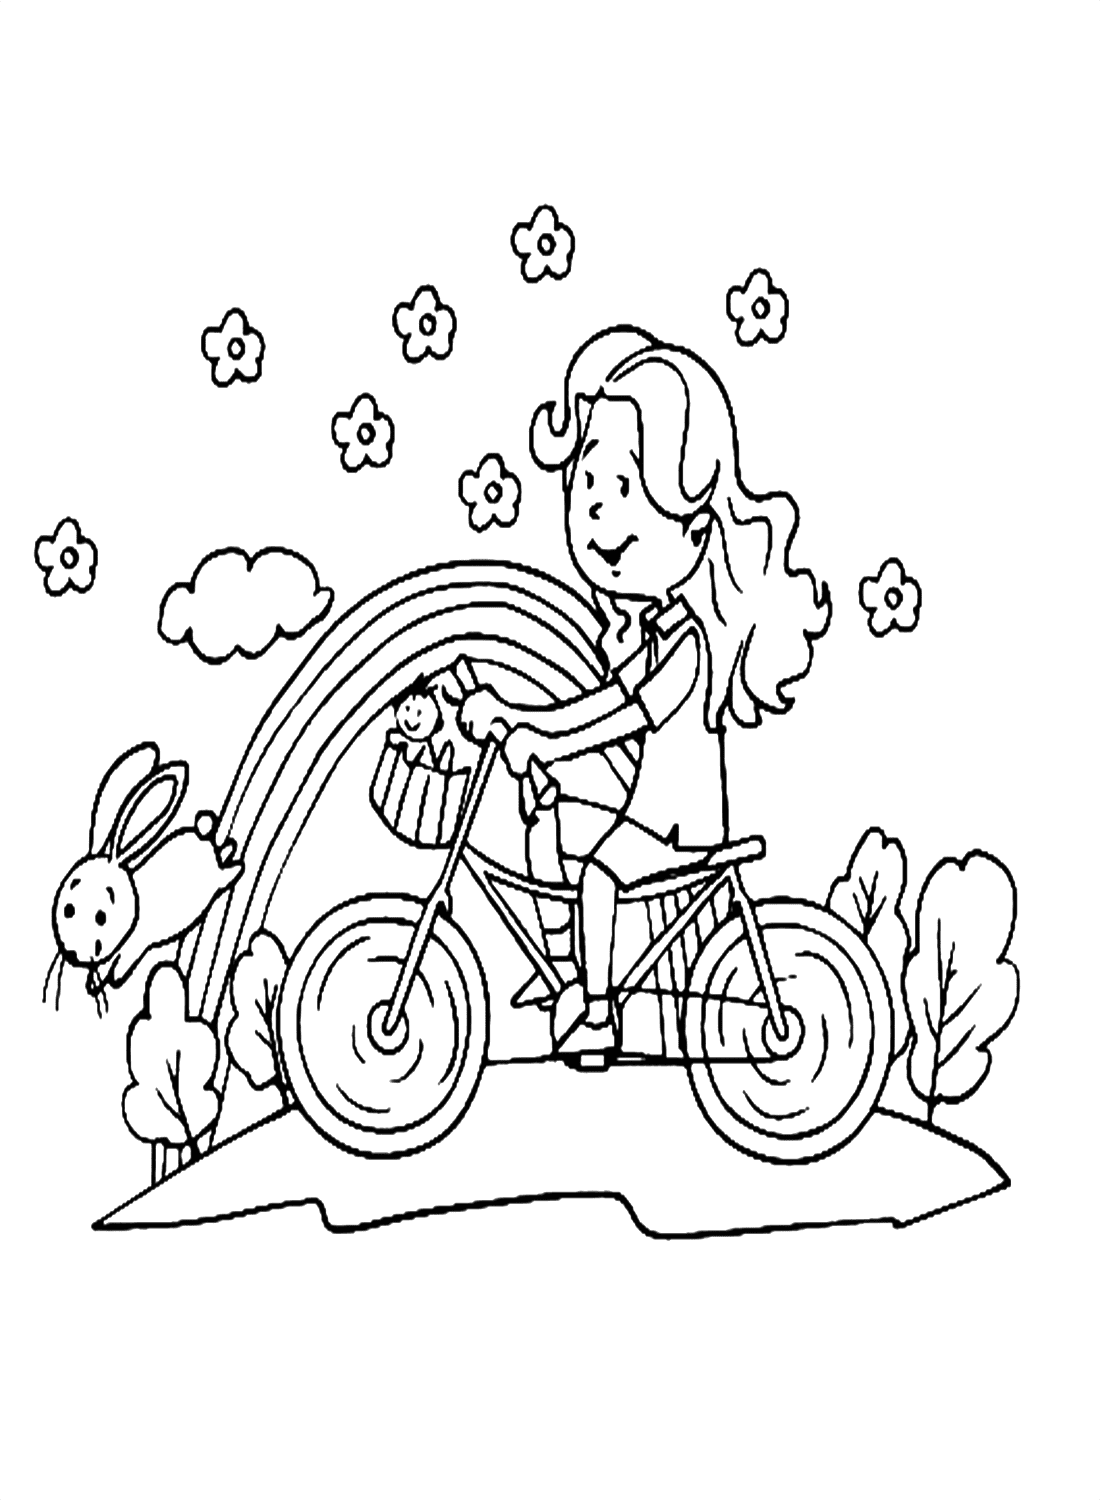 A Cute Girl Riding Bike Coloring Page